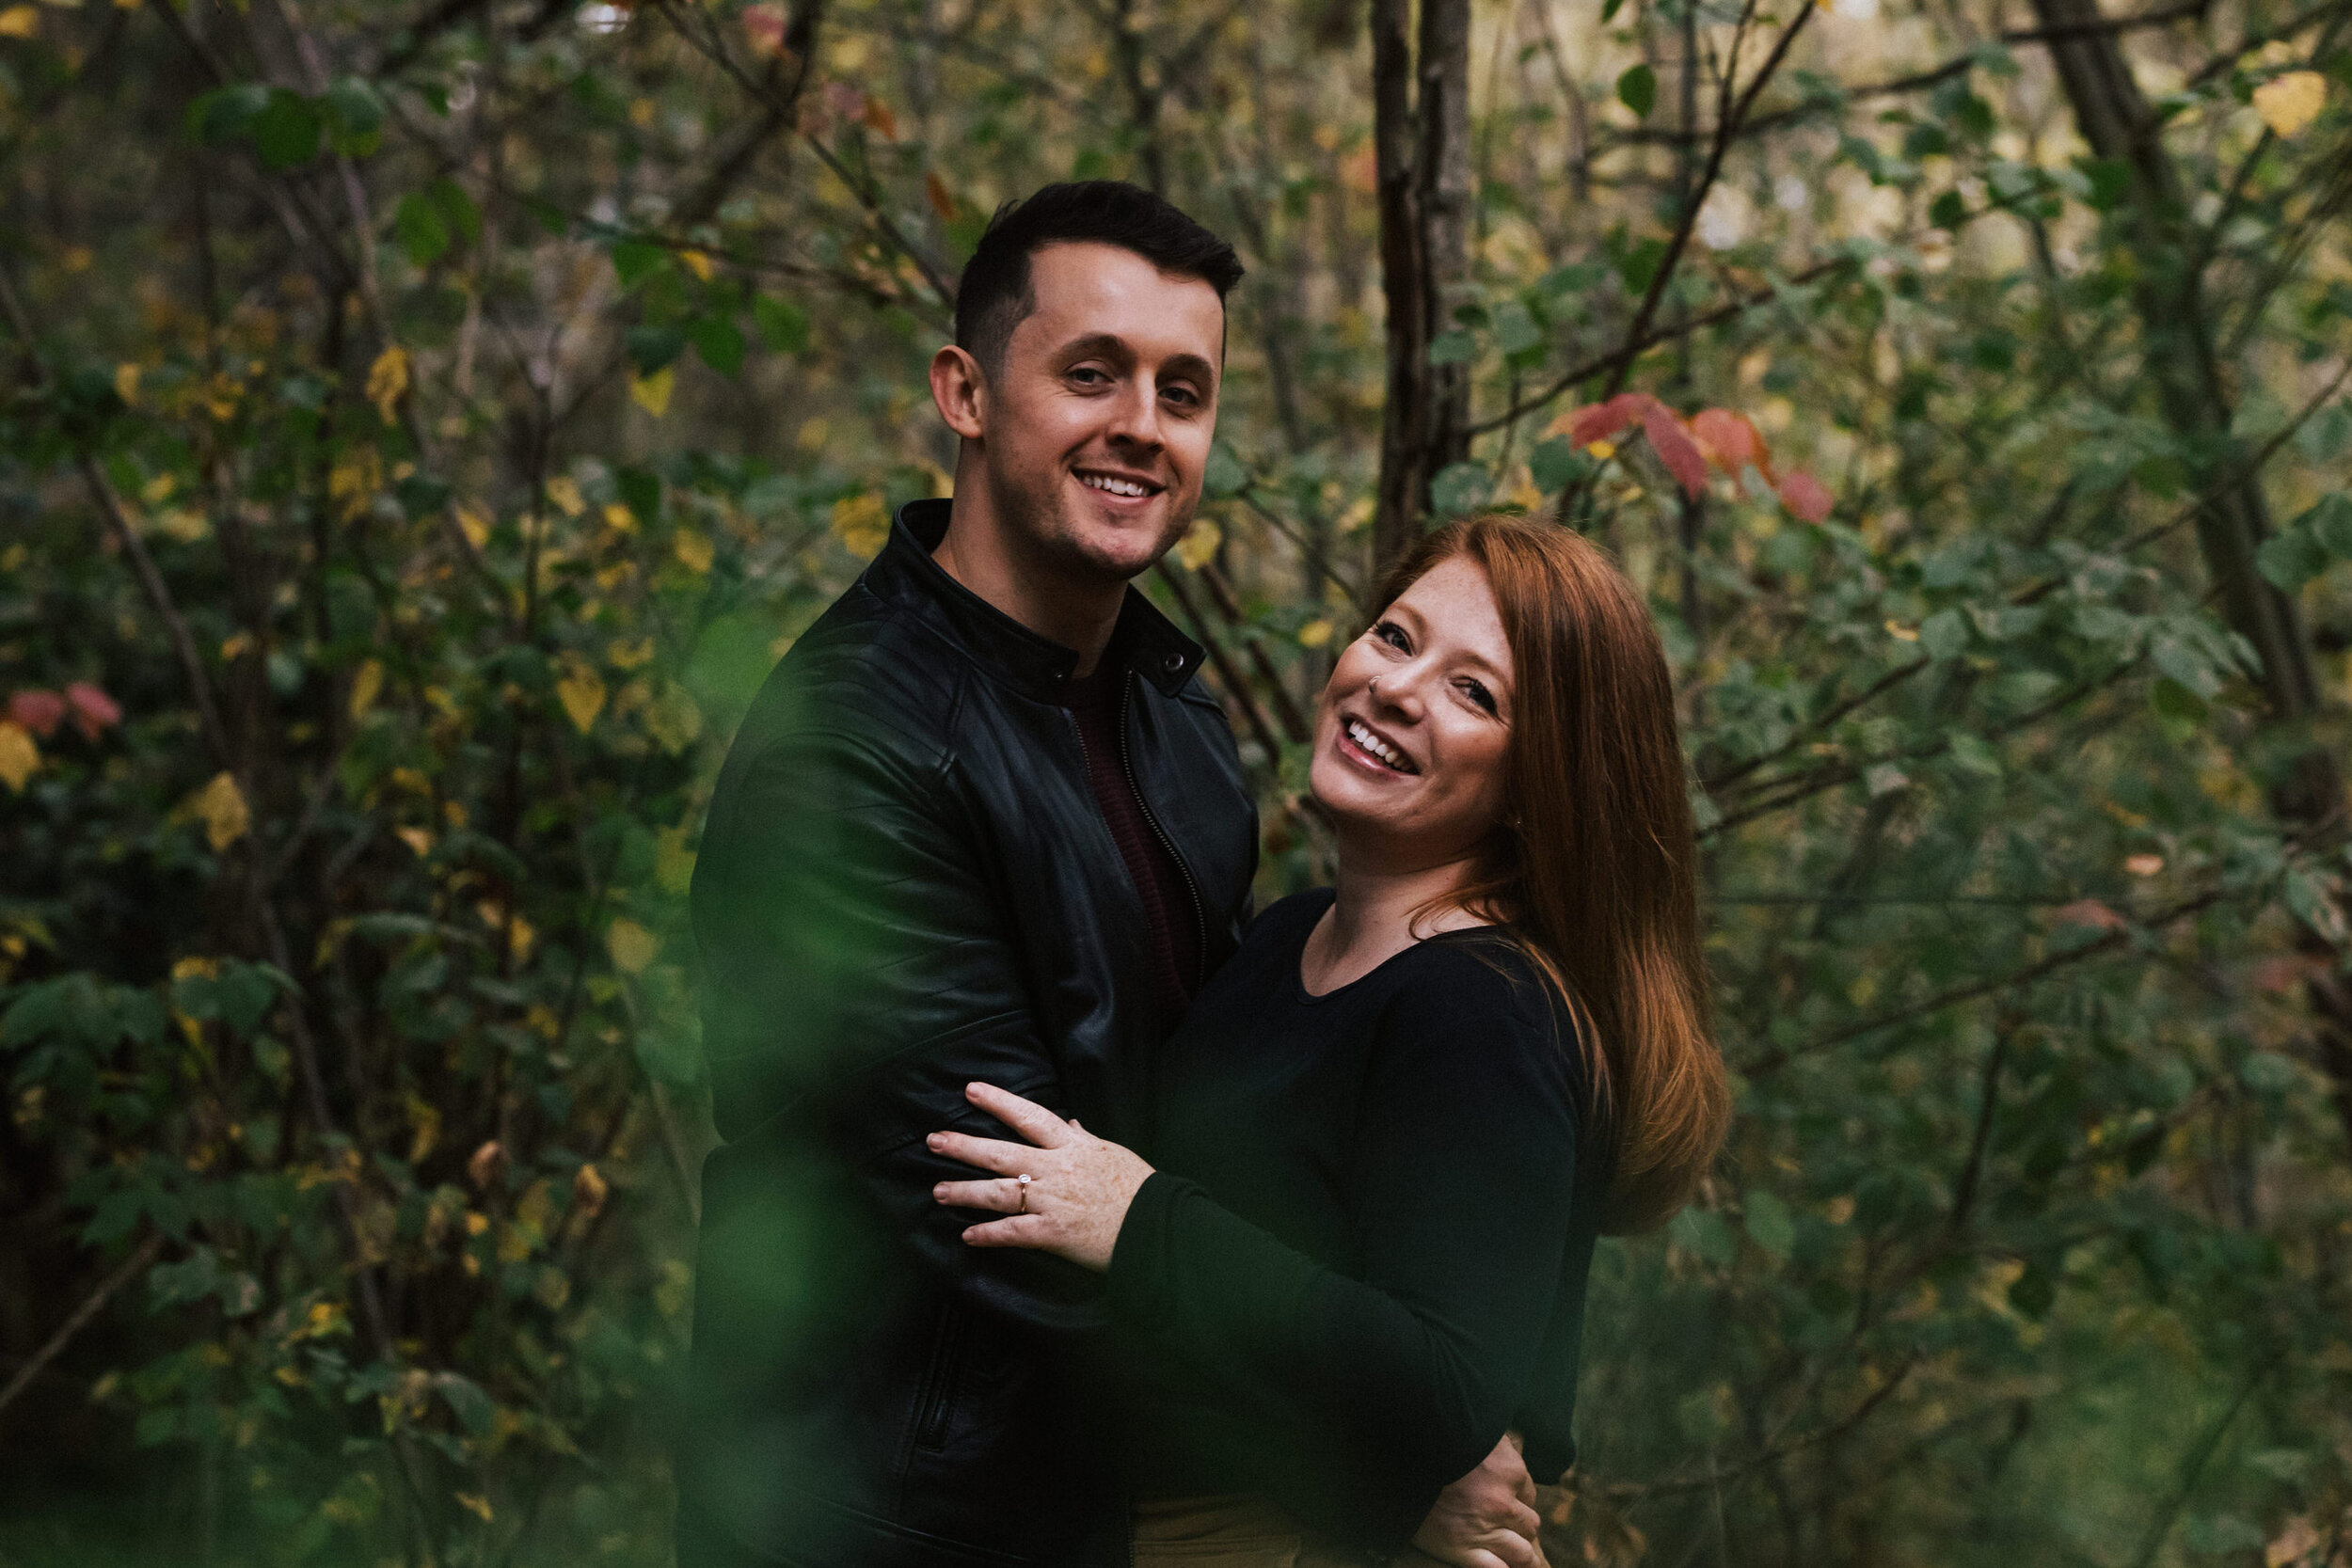 Wintery Autumn Adelaide Hills Engagement Session 09.JPG